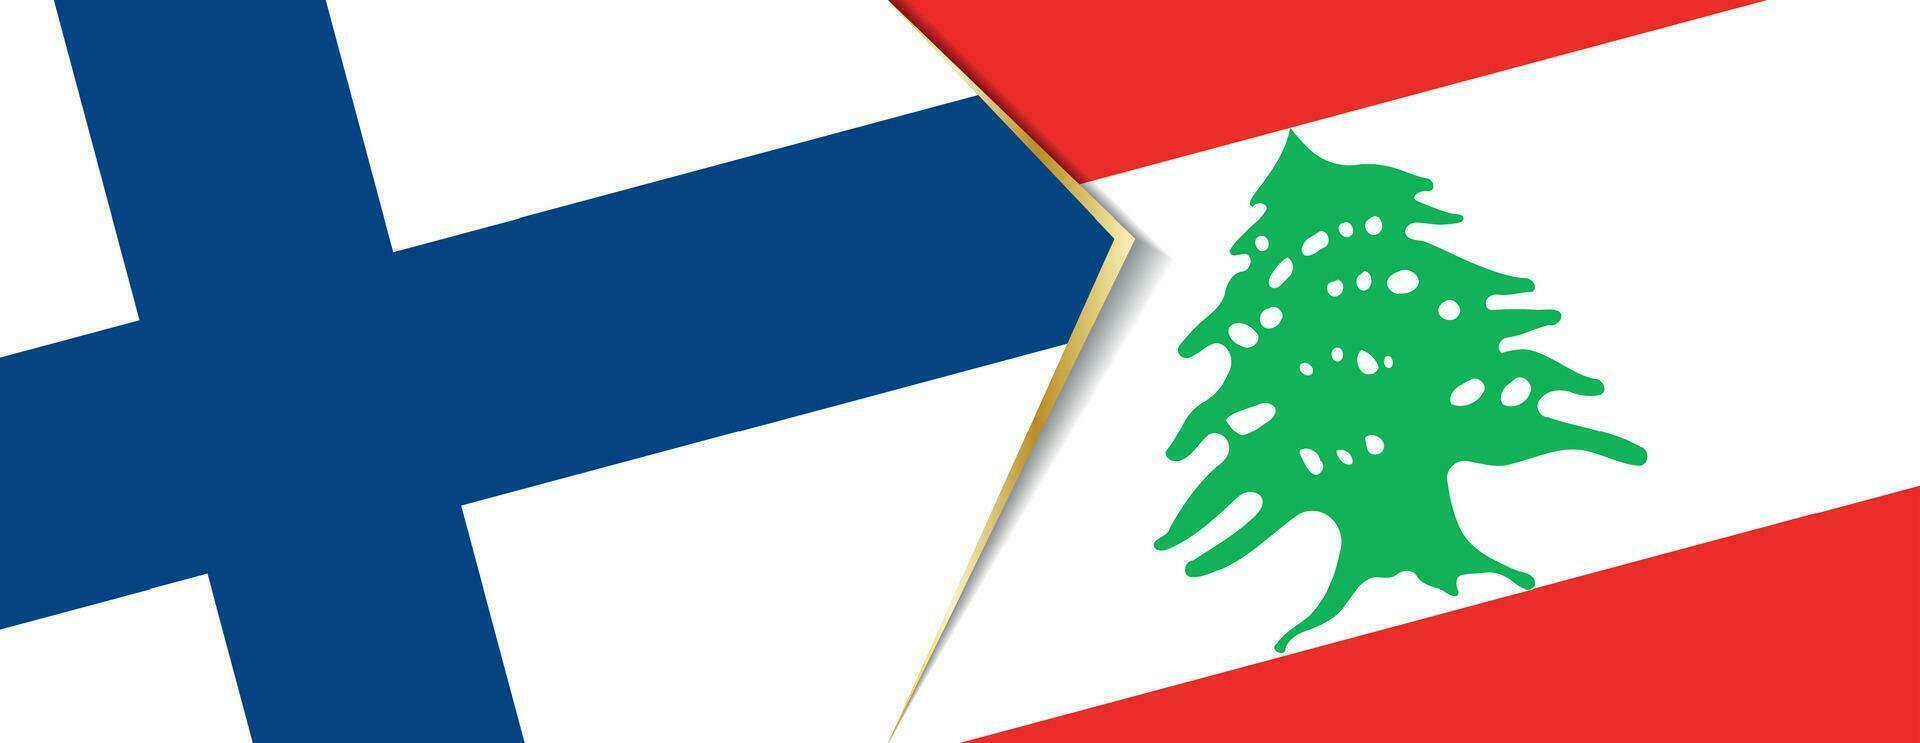 Finland and Lebanon flags, two vector flags.